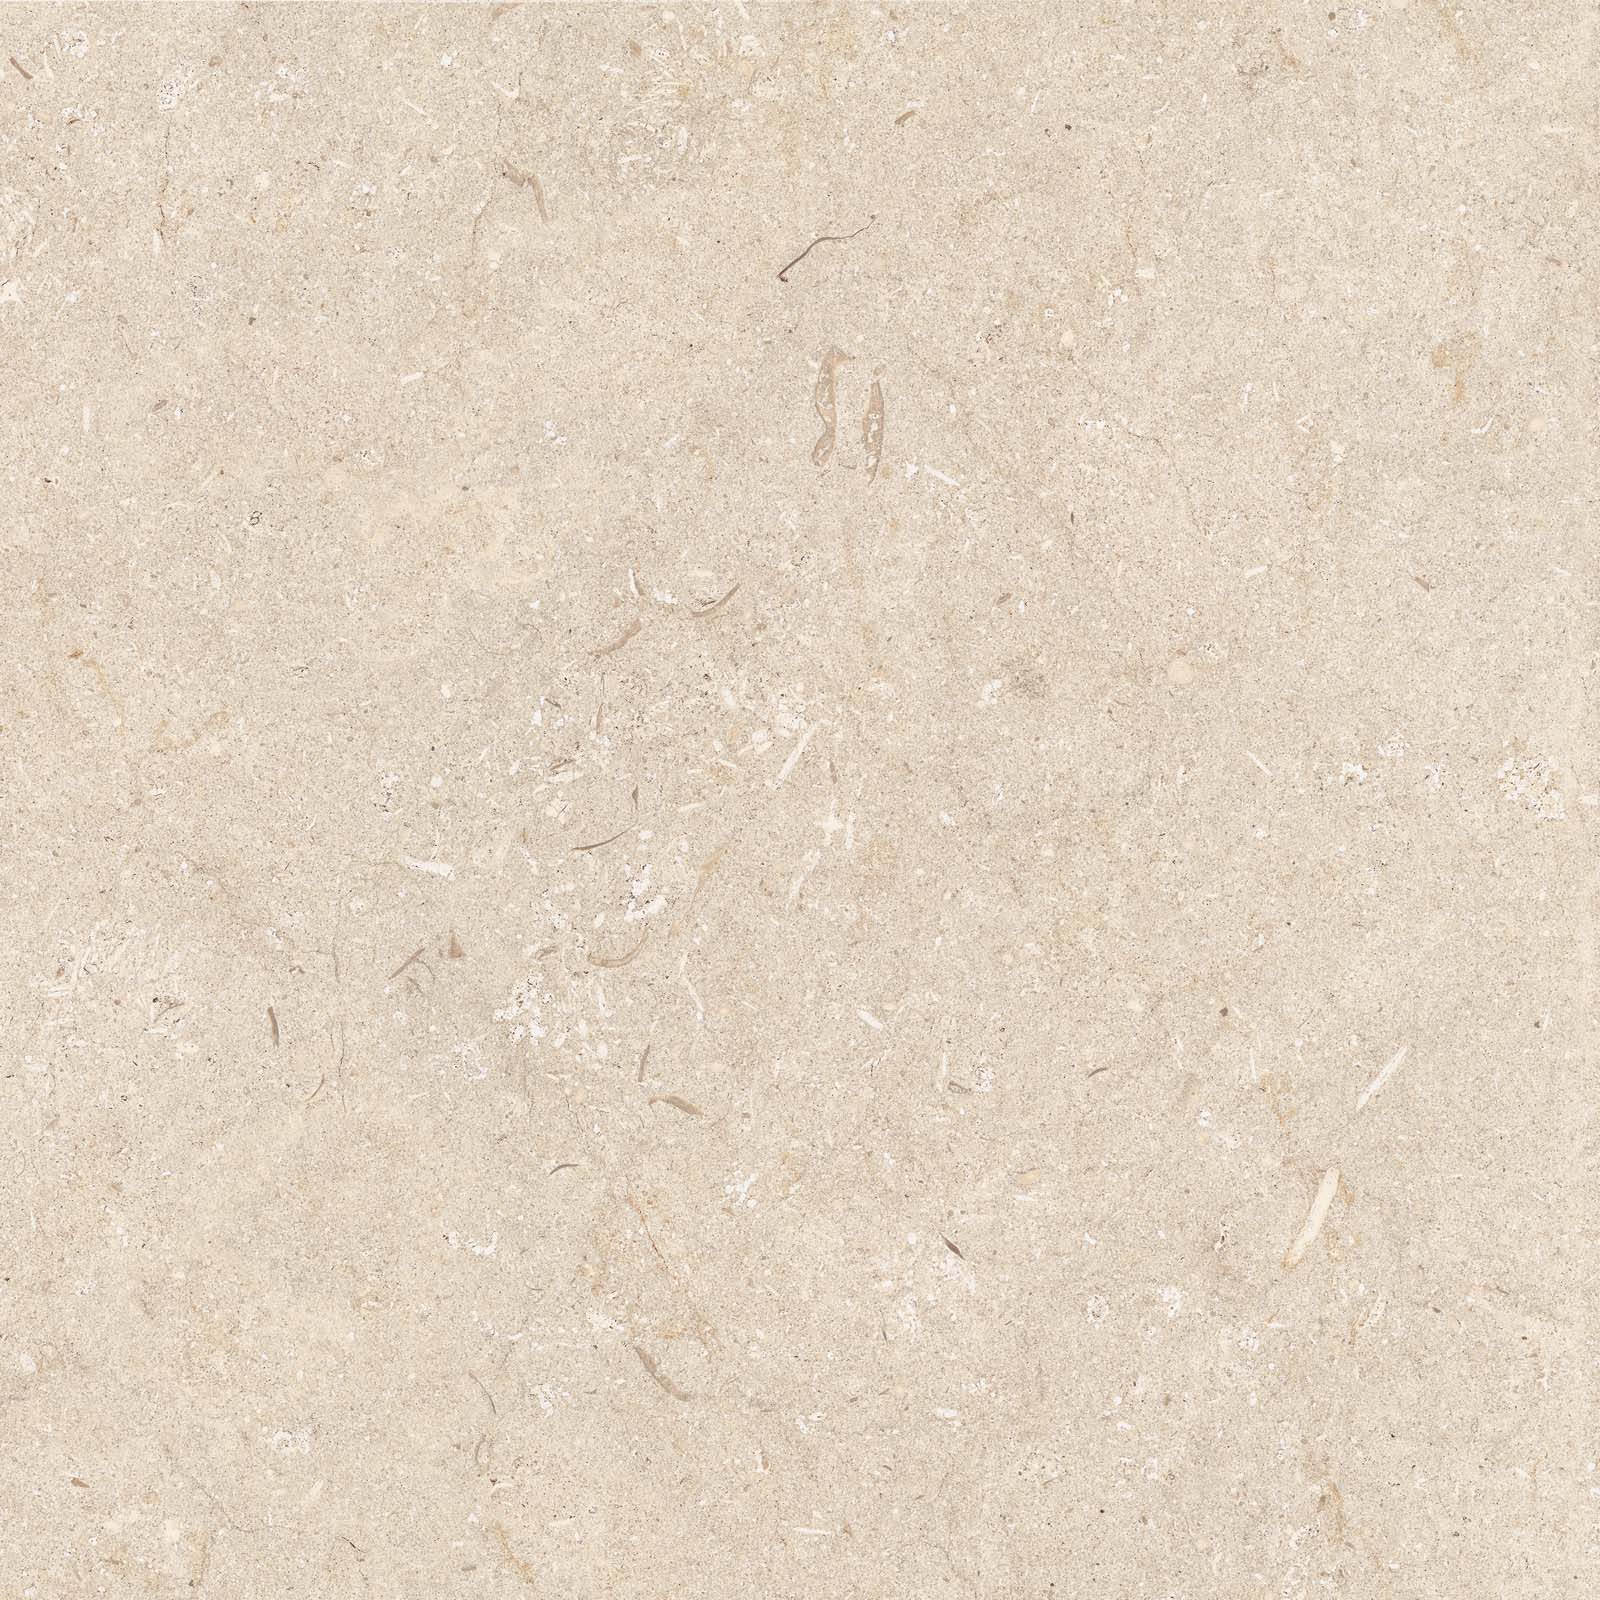 ABK Poetry Stone Trani Beige Naturale PF60010540 60x60cm rectified 8,5mm